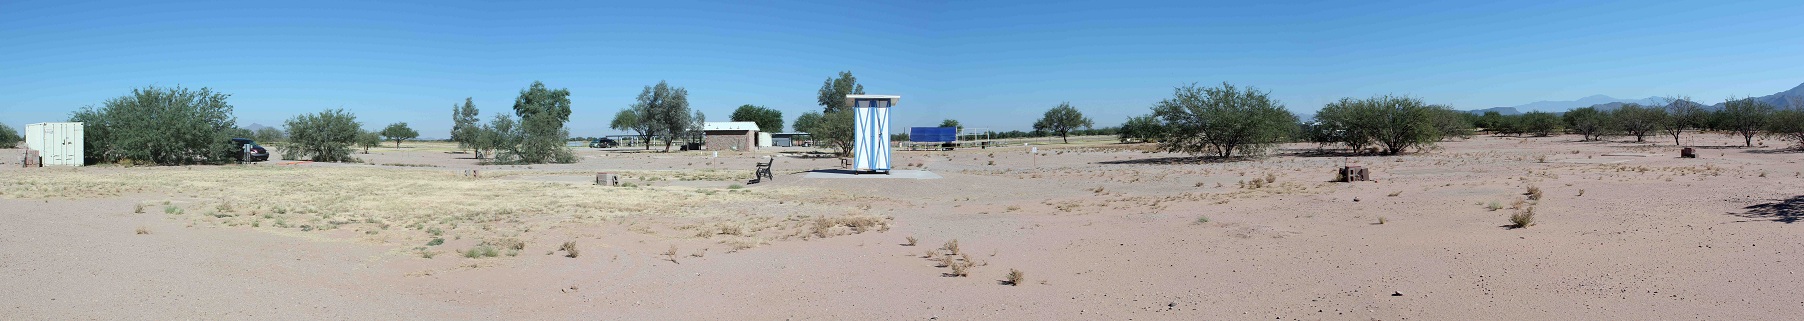 The TIMPA Observing Site Tucson Amateur Astronomy Asso